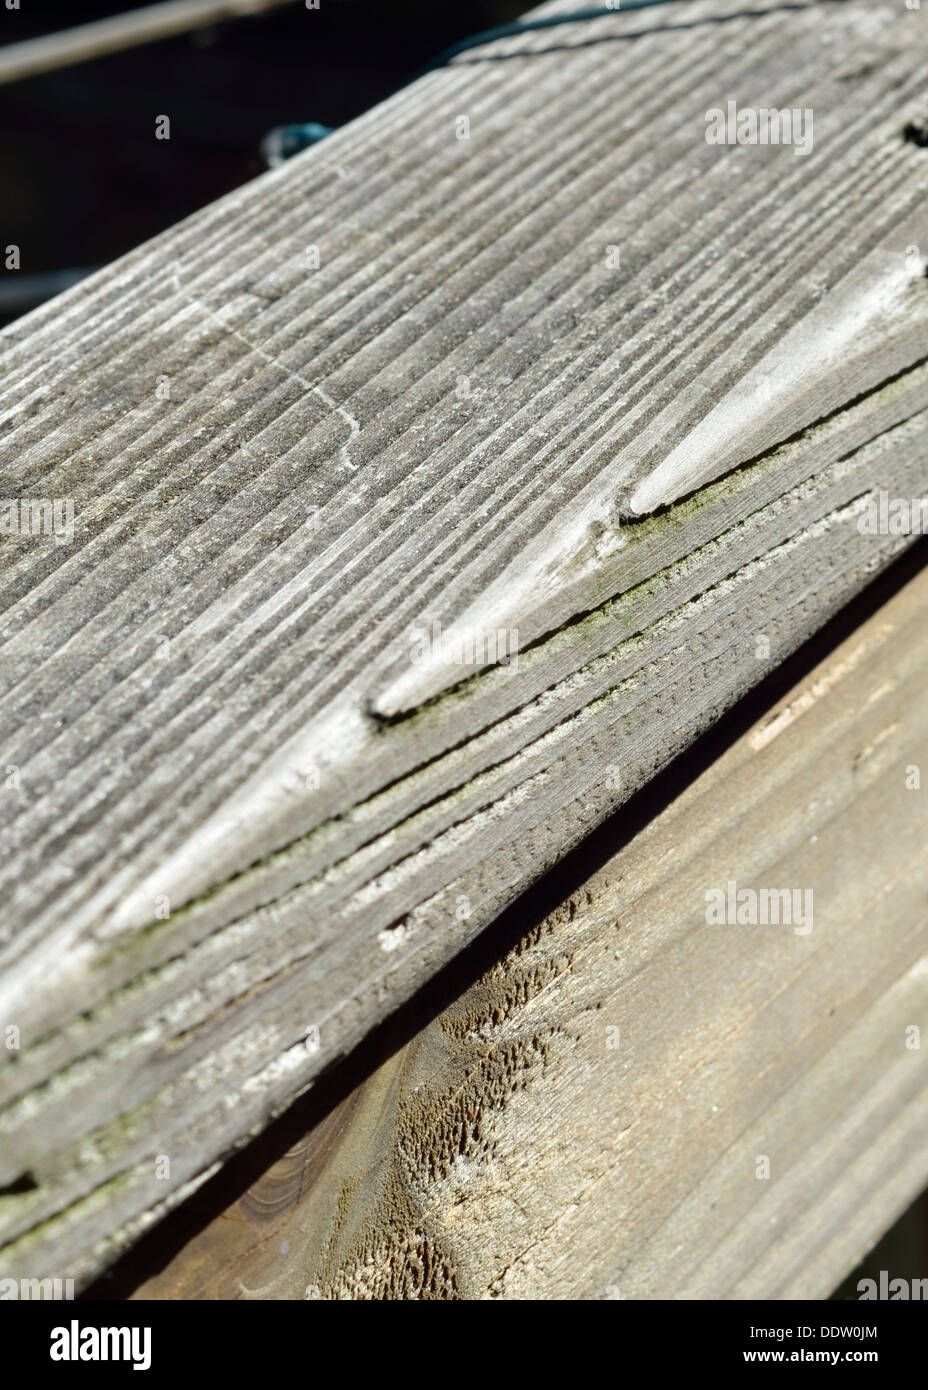 Wooden railing fence post as part of decking Stock Photo